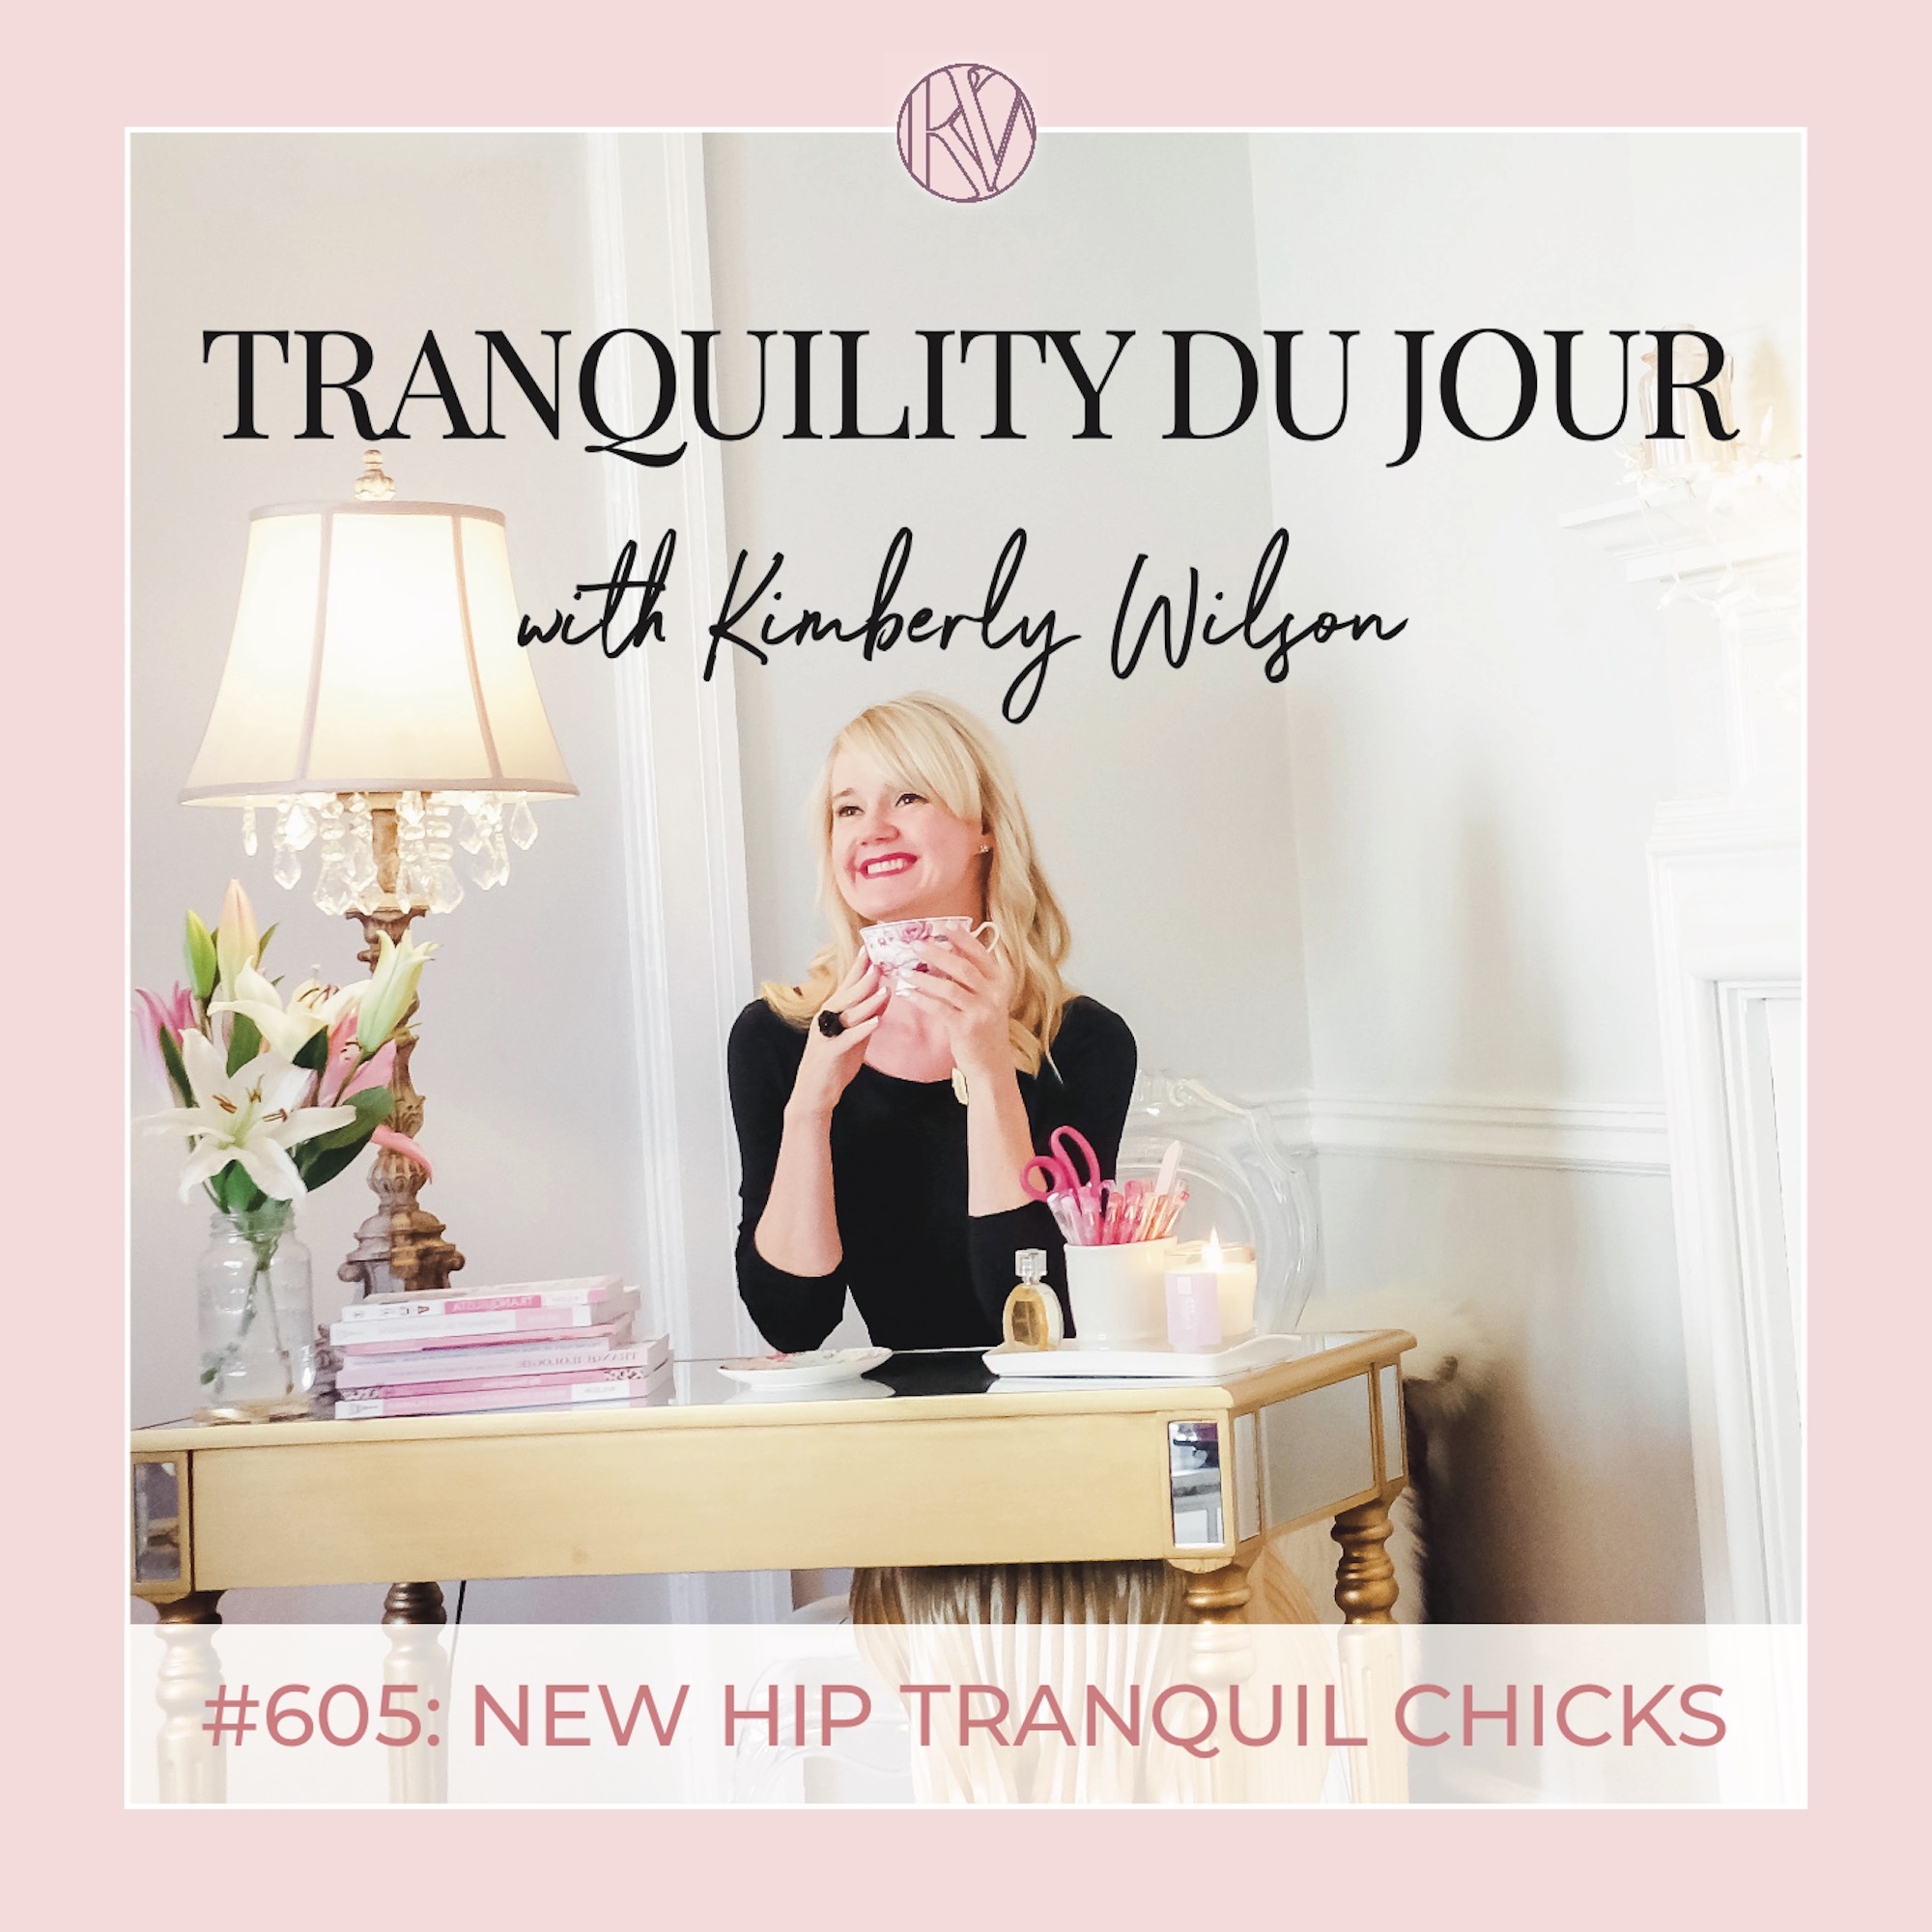 Tranquility du Jour #605: New Hip Tranquil Chicks